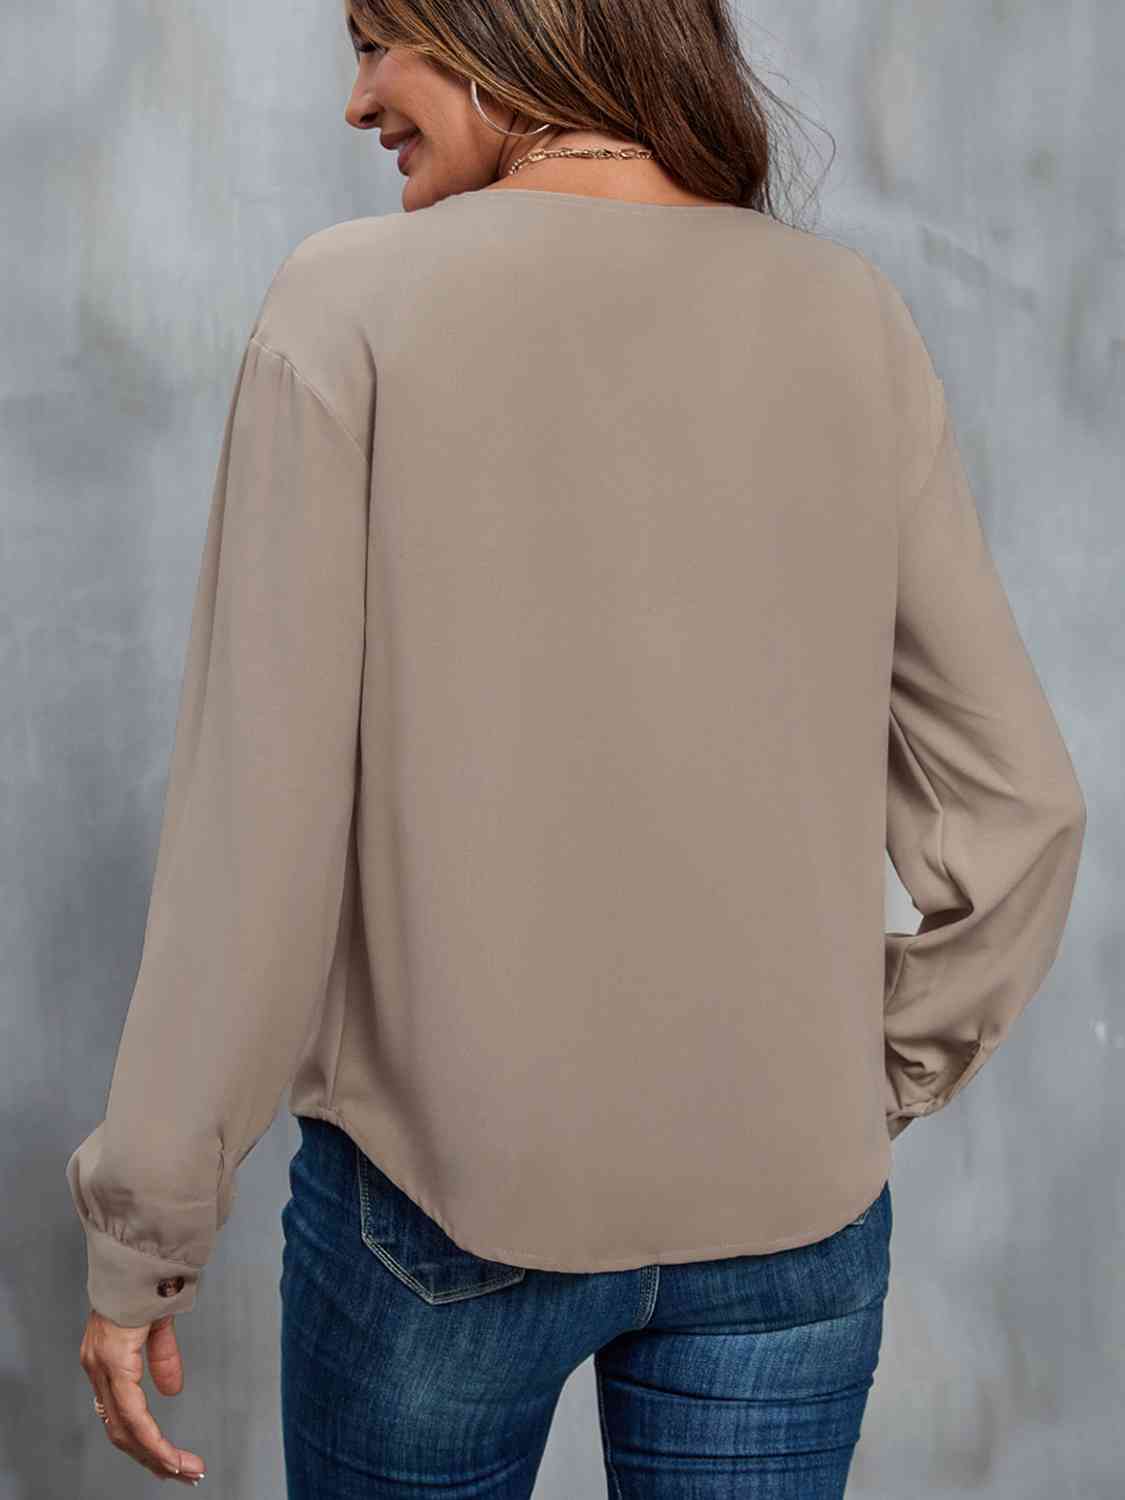 Light Slate Gray Asymmetrical Neck Buttoned Long Sleeve Top Sentient Beauty Fashions Apparel & Accessories